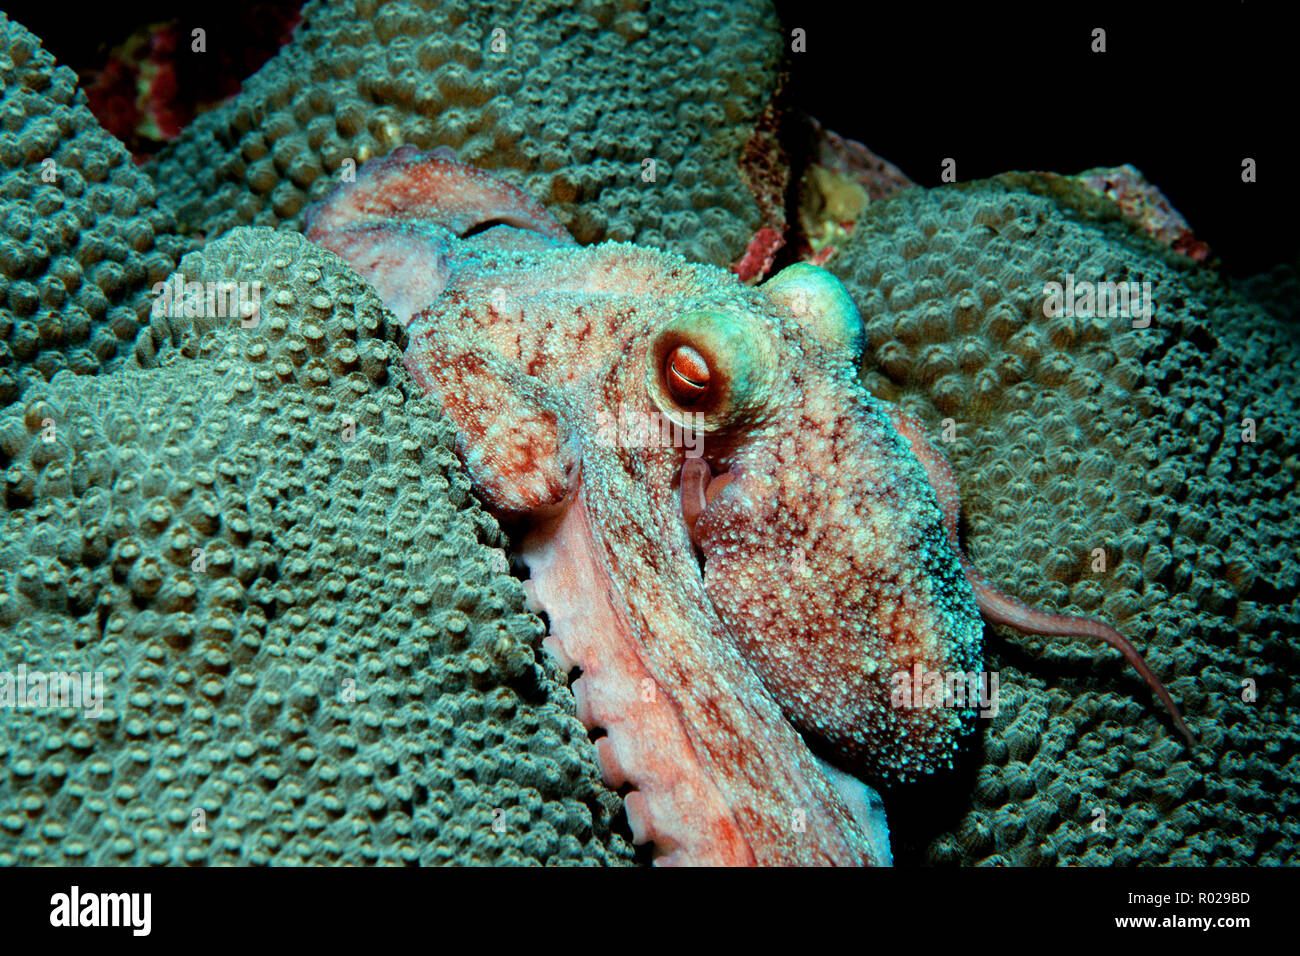 Caribbean reef octopus, Octopus briareus, is active at night, changing its color and texture to match its surroundings, Caribbean, Atlantic Ocean Stock Photo